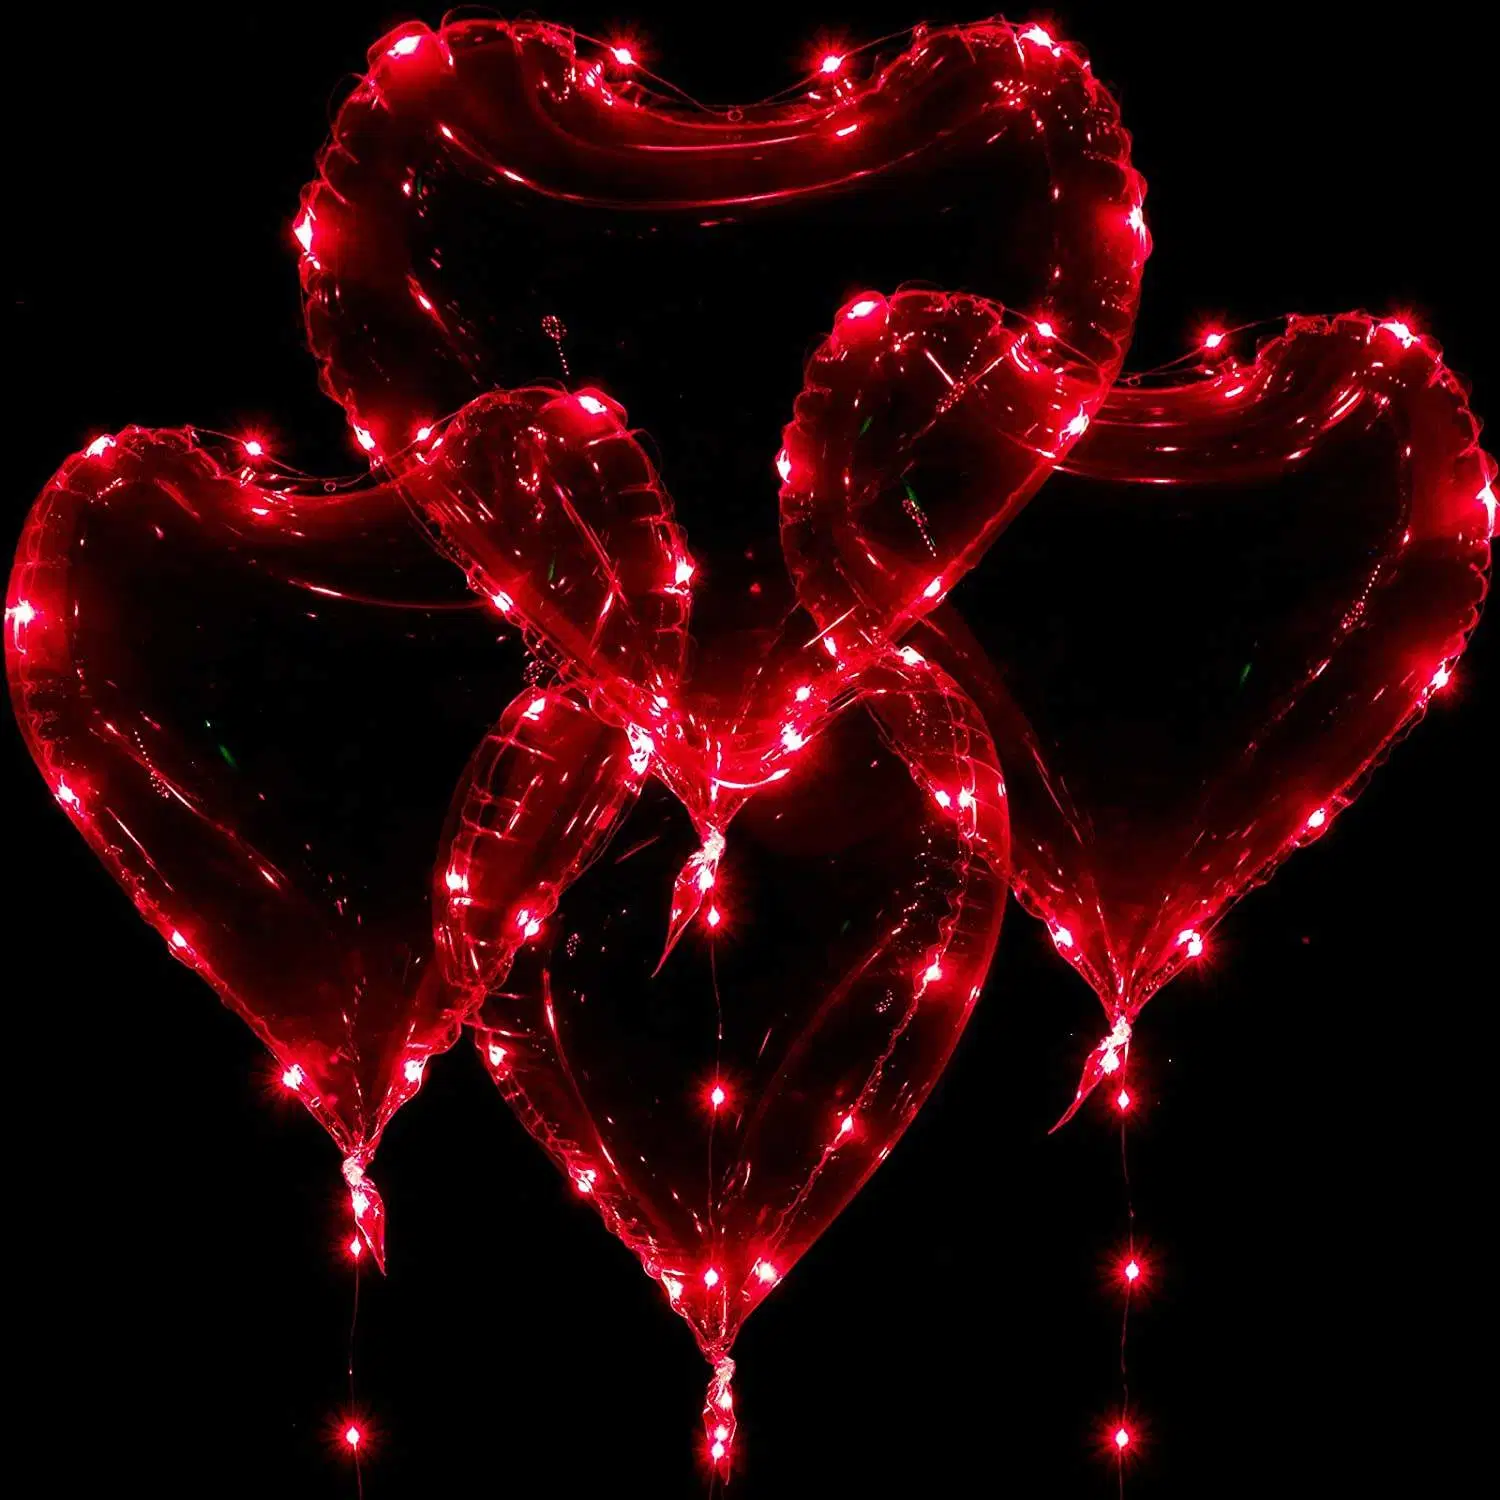 Large Clear Light up Heart Bobo Balloons with 10FT LED Red String Lights for Valentines Day Wedding Christmas